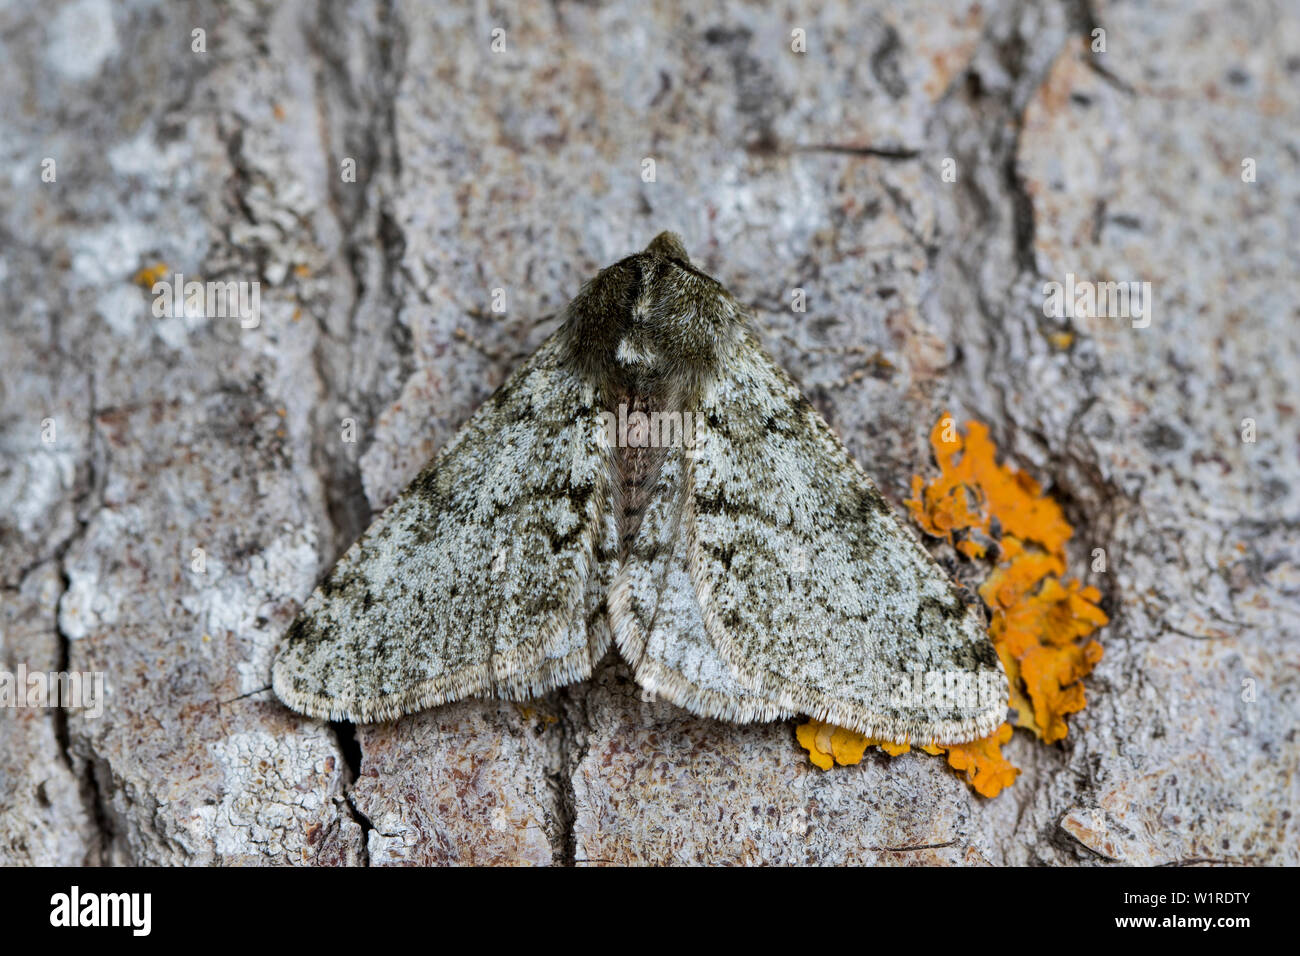 phygalia pilosaria up close, perched on the bark of a tree. Stock Photo